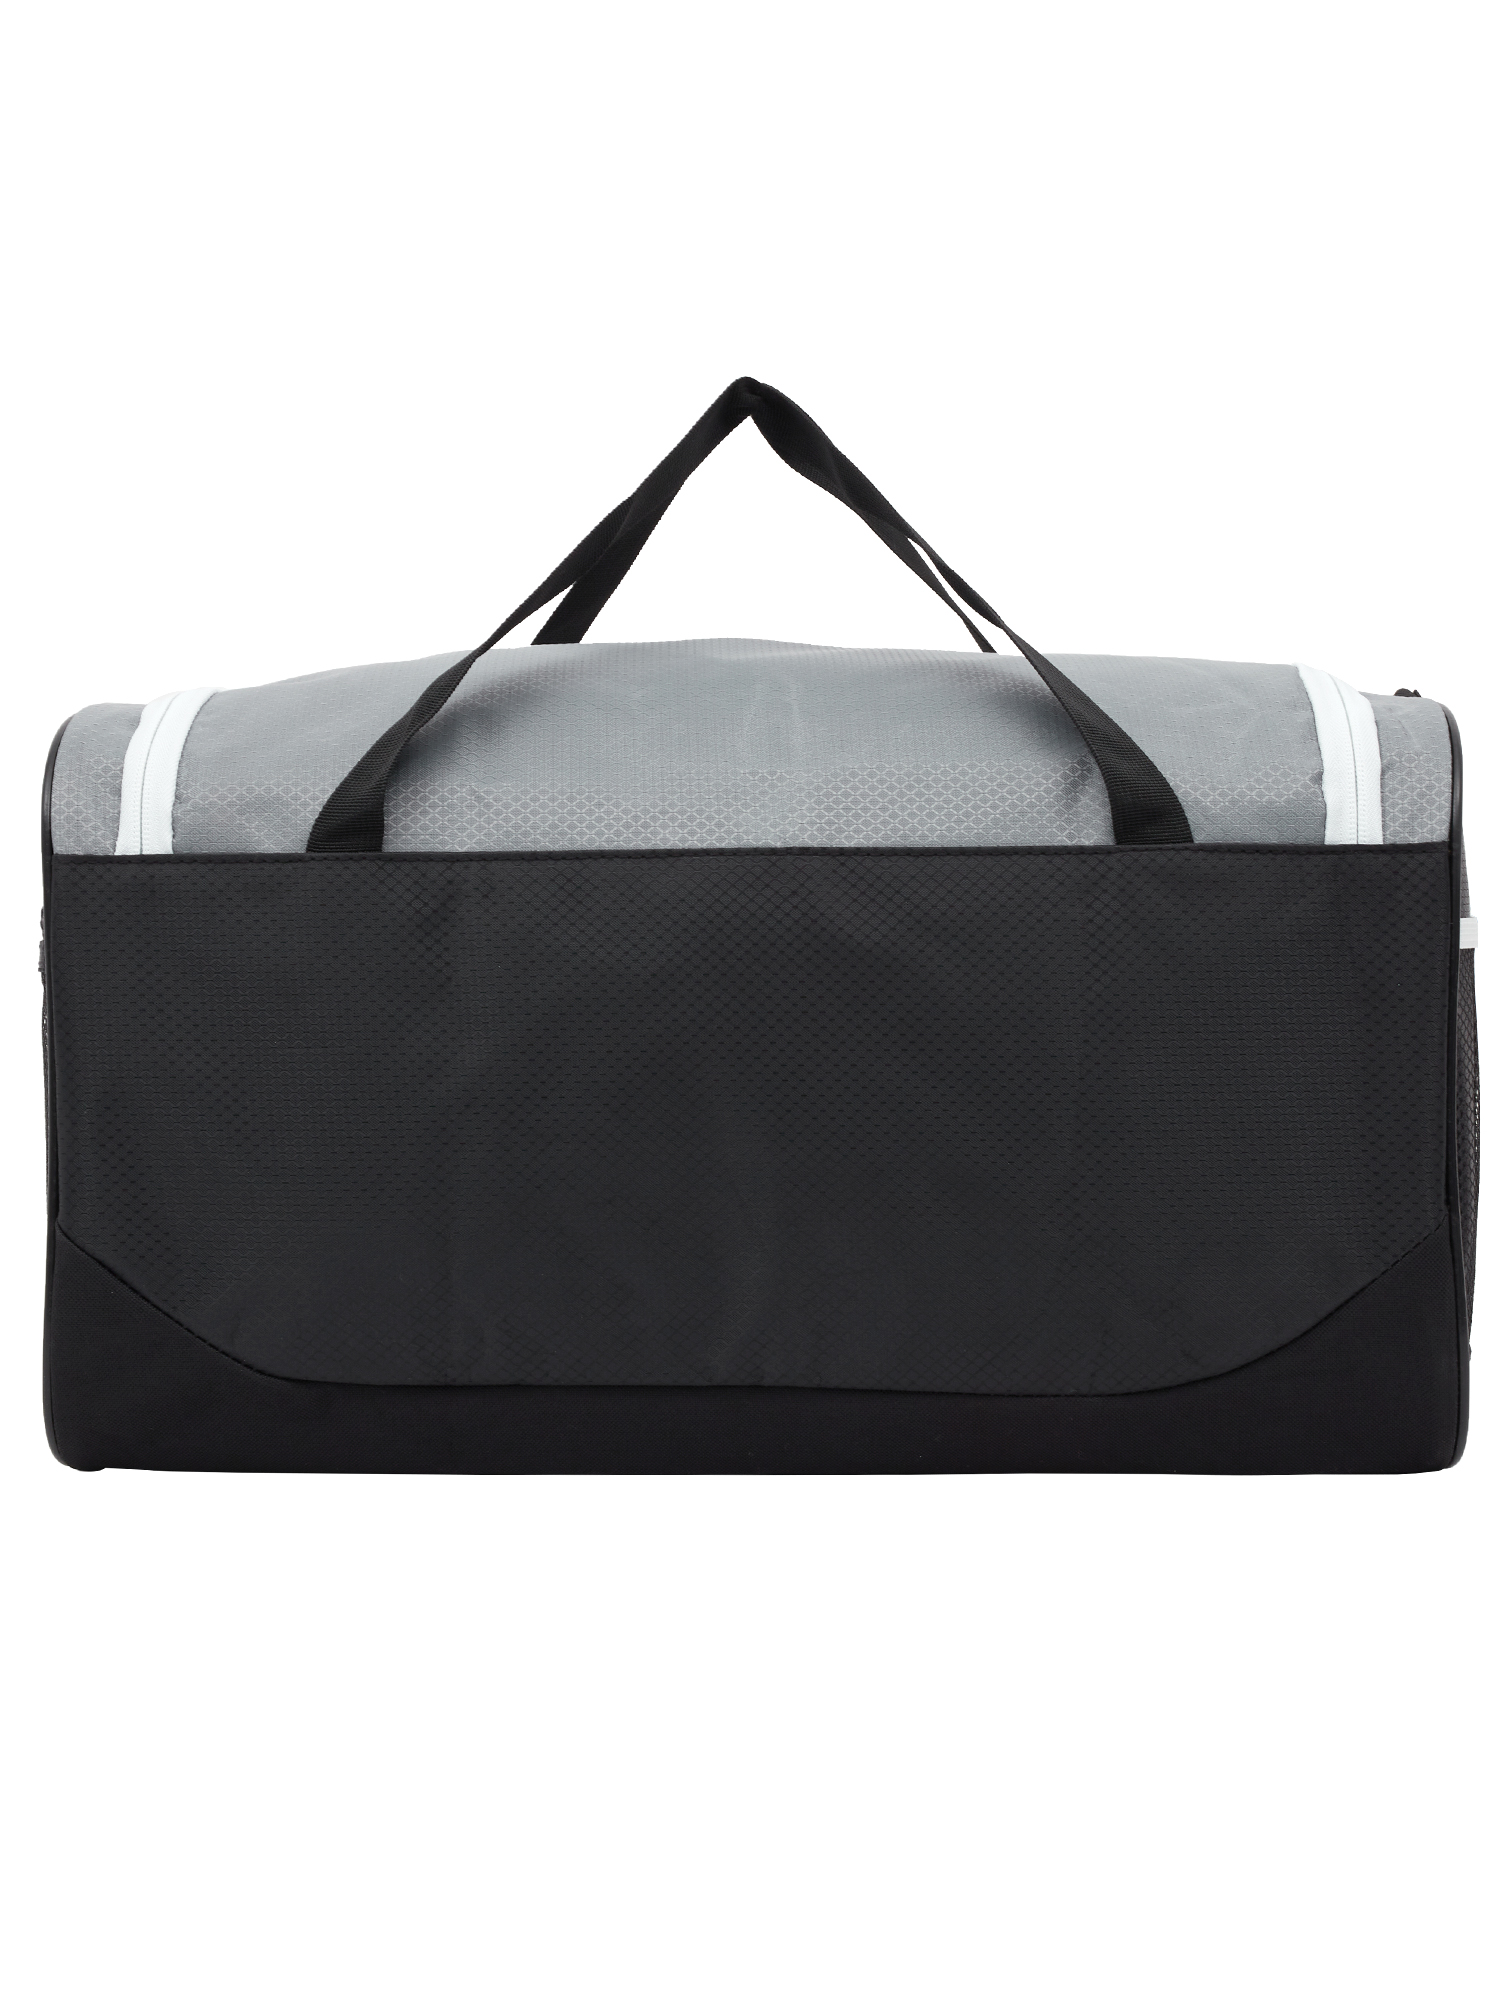 Protege 18" Polyester Sport Duffel - Black - image 4 of 10